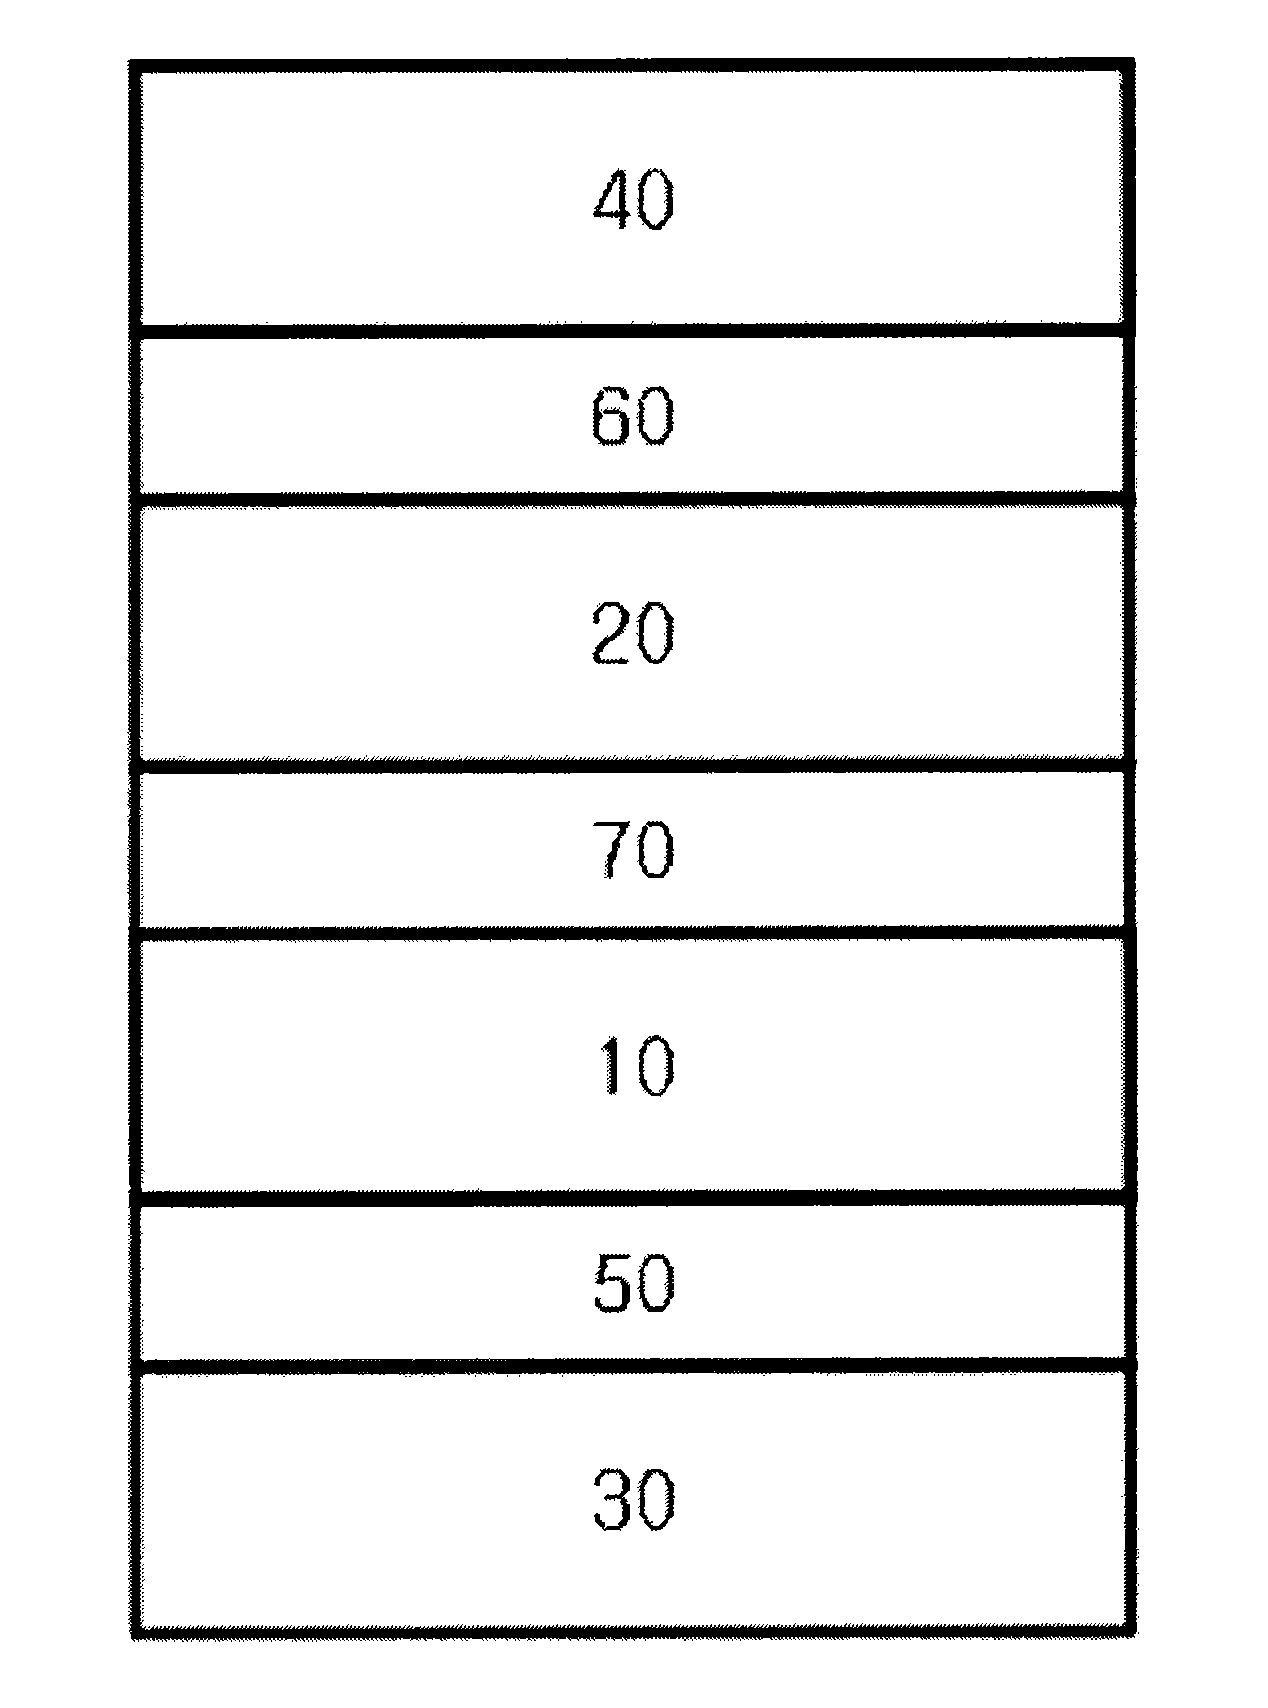 Magnetic tunnel junction structure with perpendicular magnetization layers